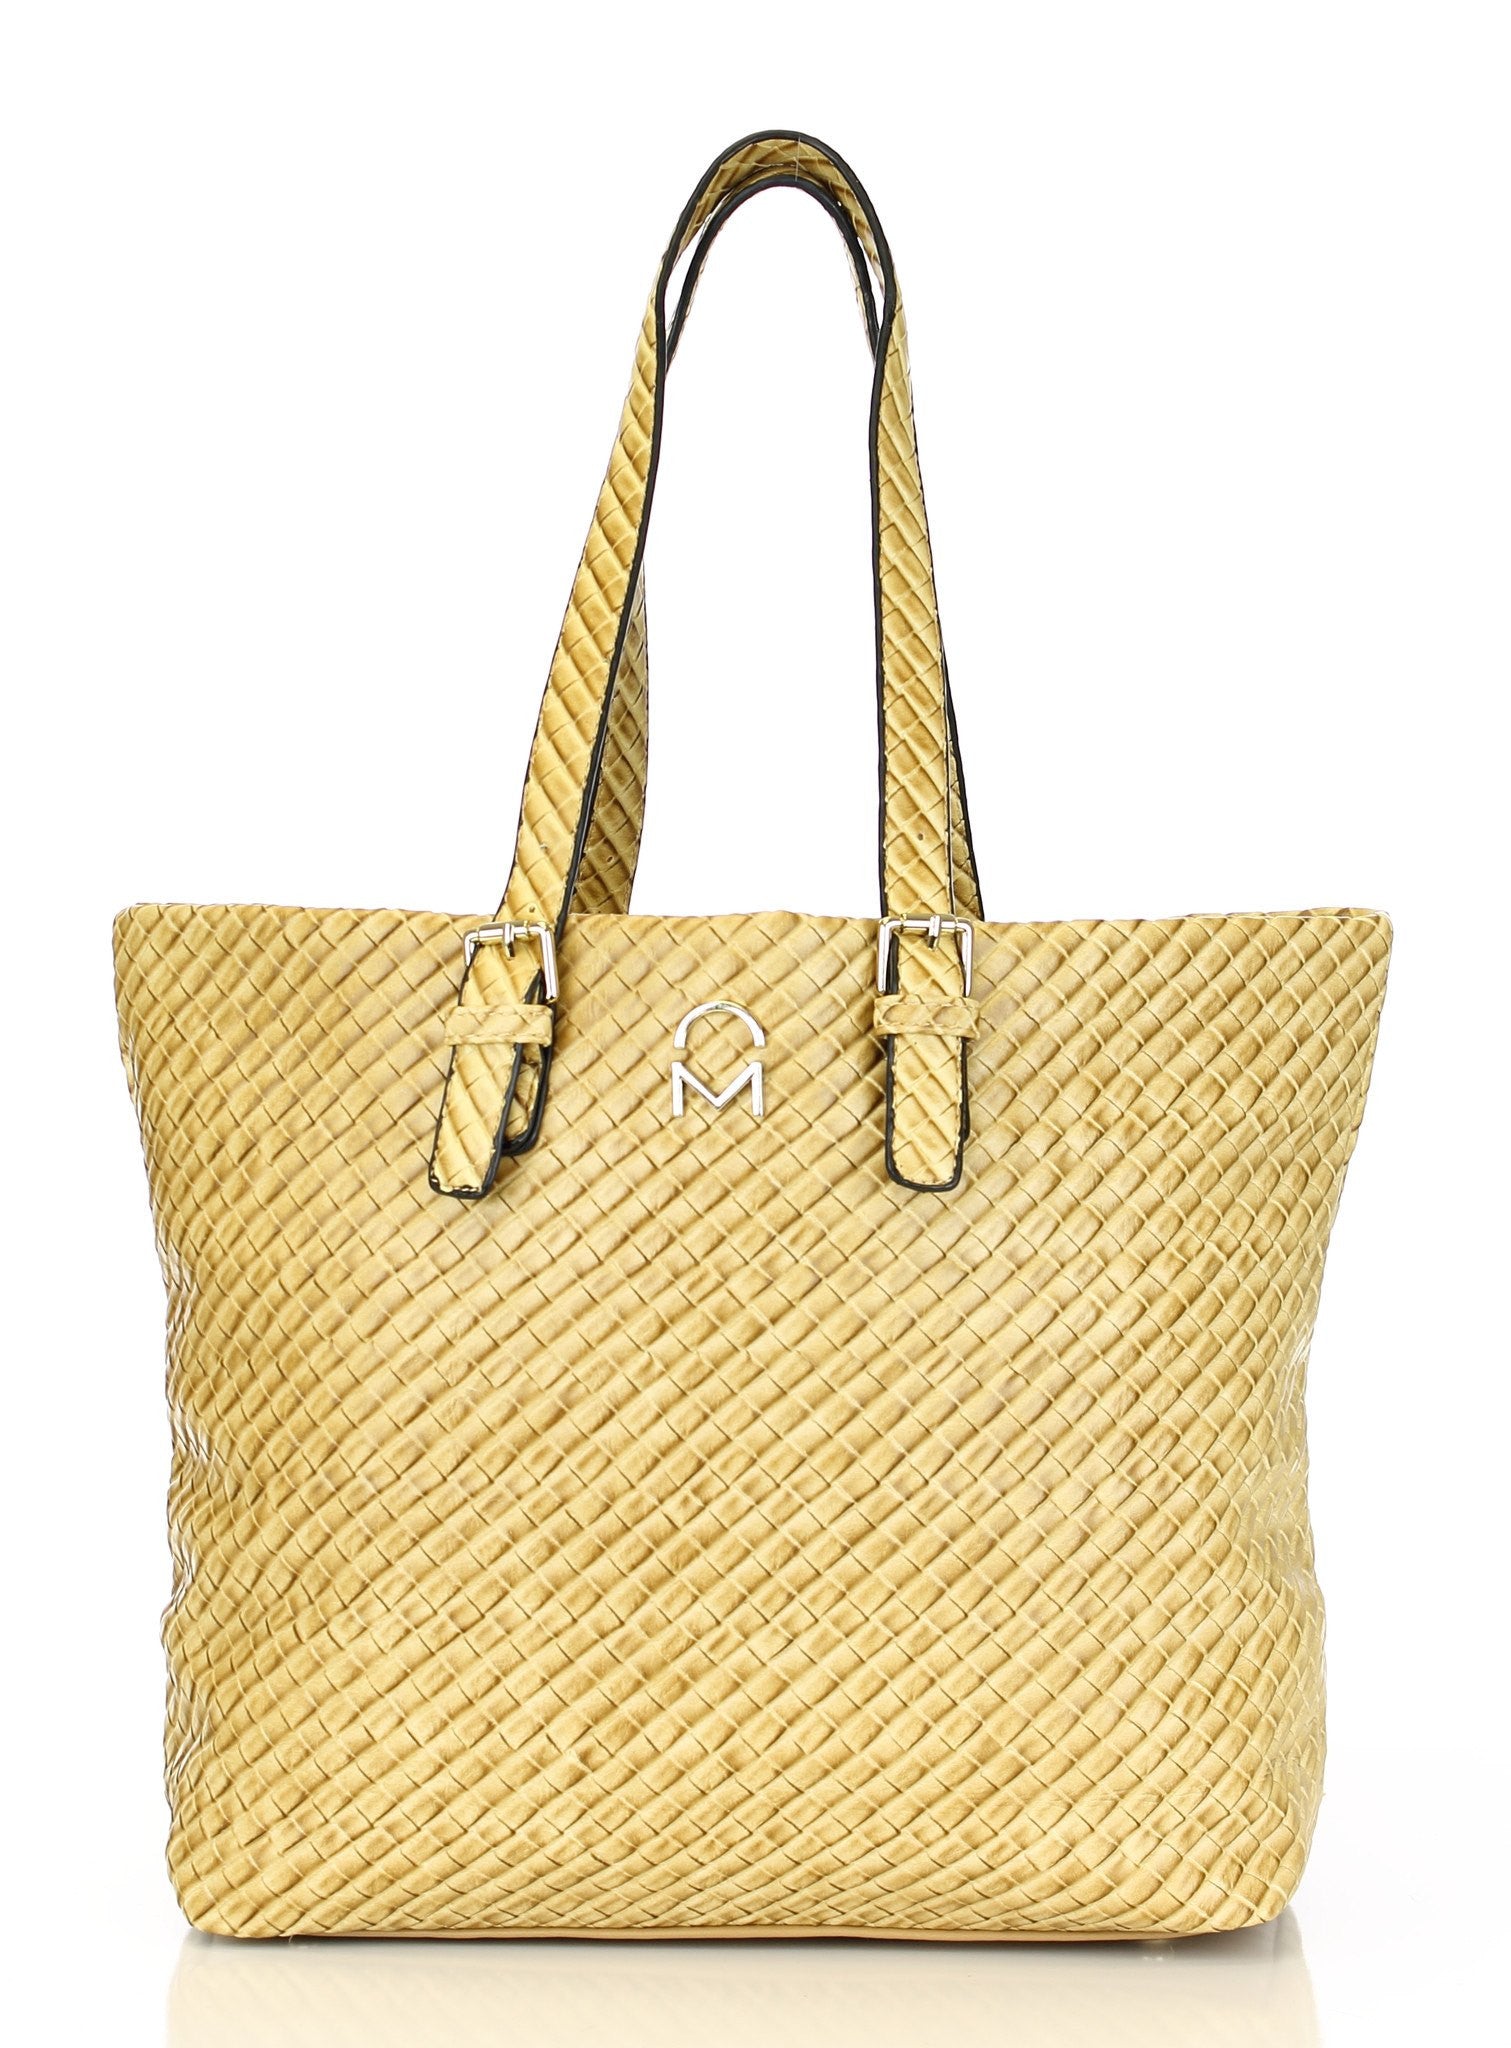 Weave Texture Enchanted Tote Bag